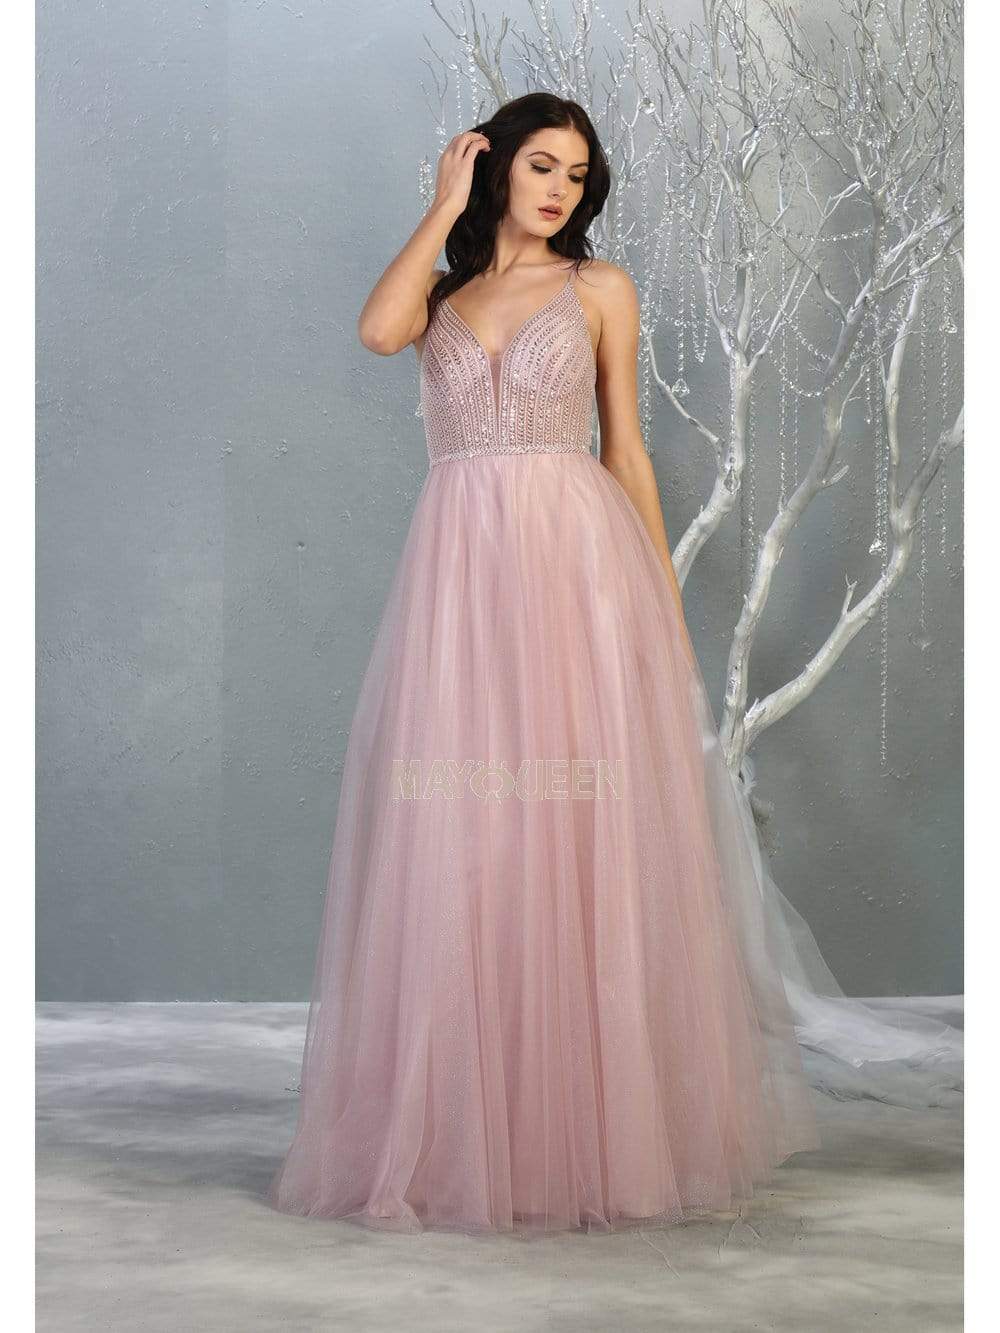 May Queen - MQ1812 Beaded Plunging V-Neck A-Line Dress Prom Dresses 4 / Mauve